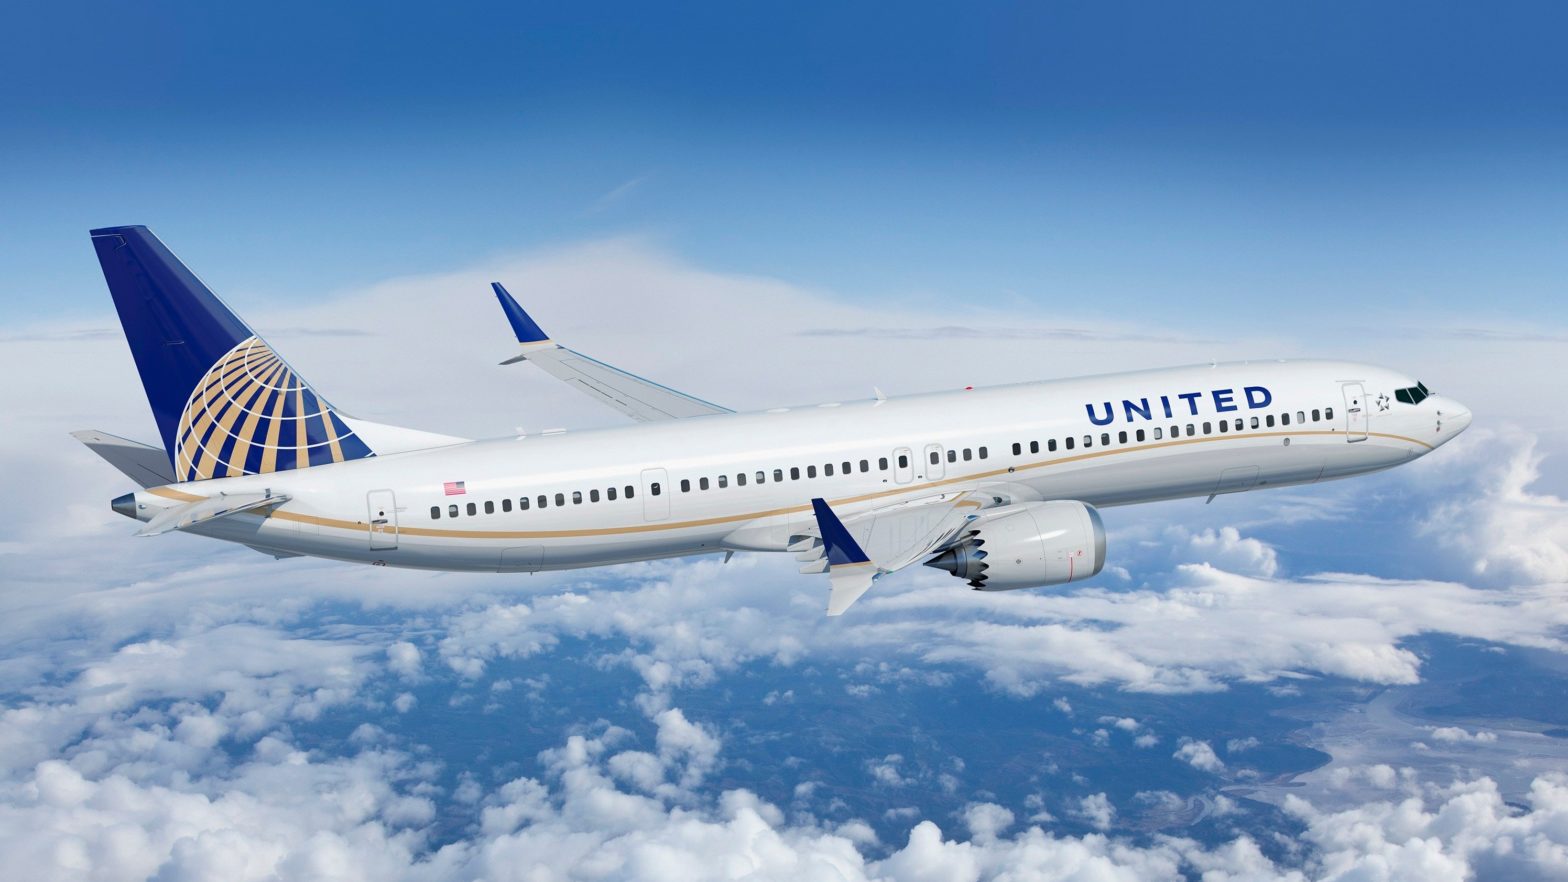 United Is The World’s Second Top Airline, Says Online Survey